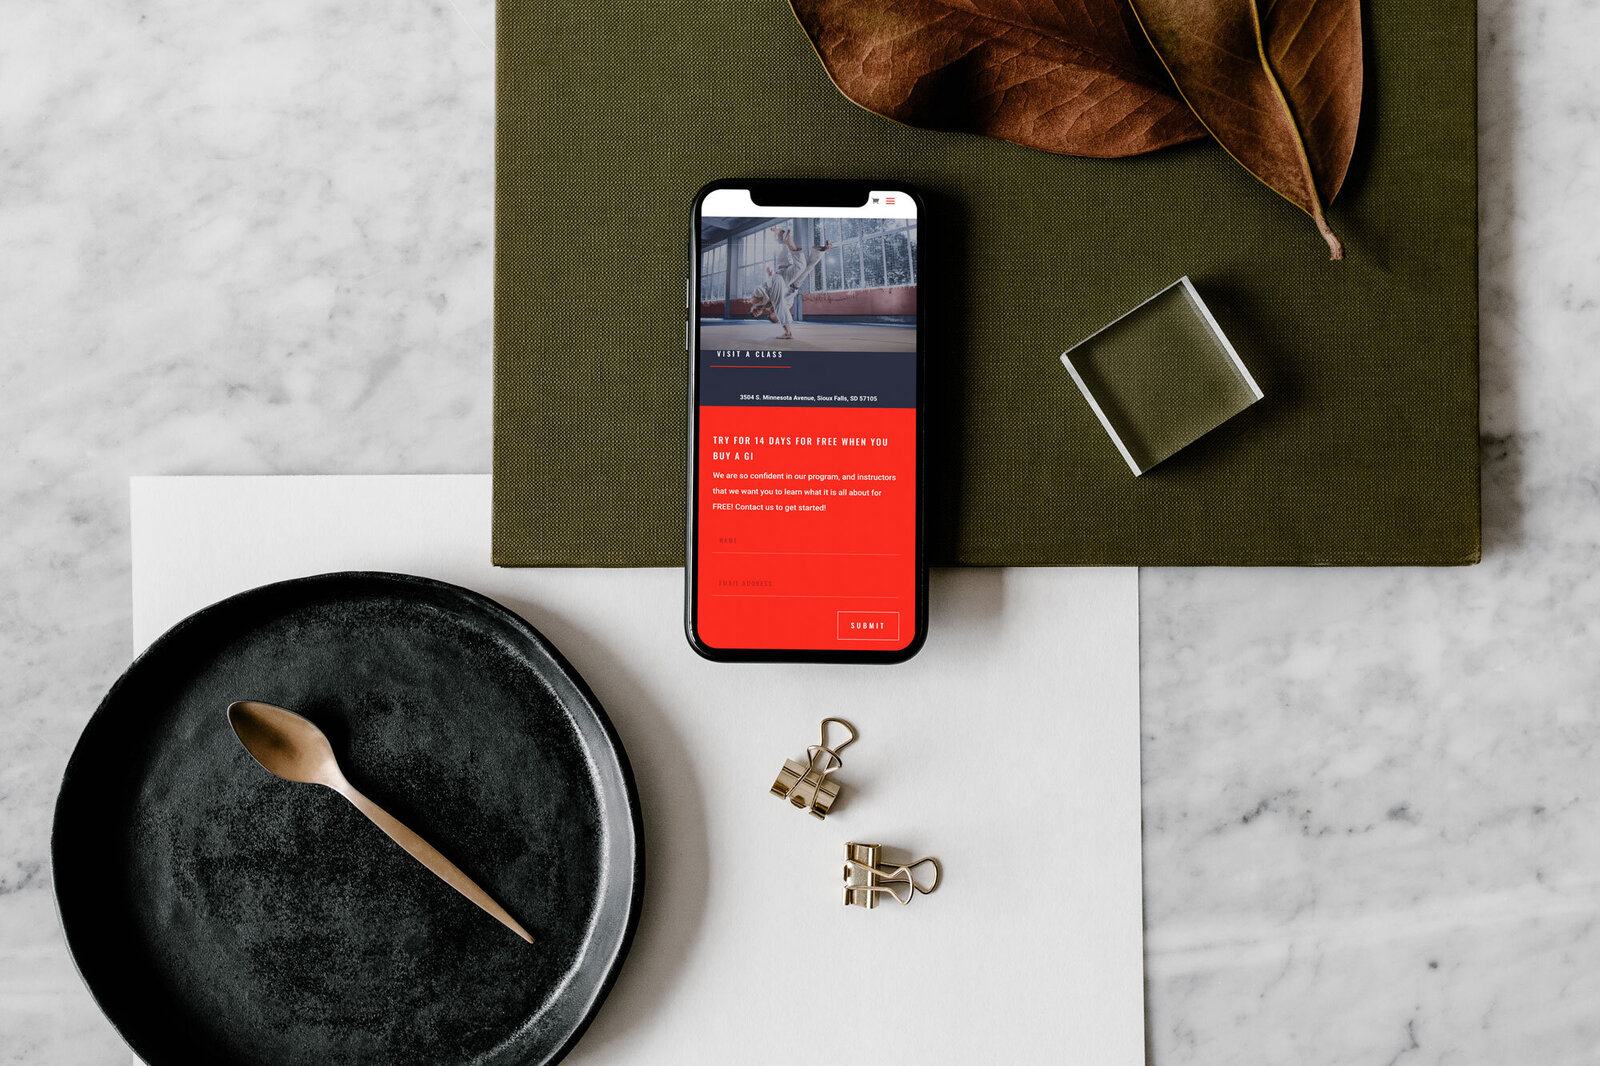 This scene captures The Agency's design mastery, displaying a mobile interface that engages and connects users to wellness services seamlessly.